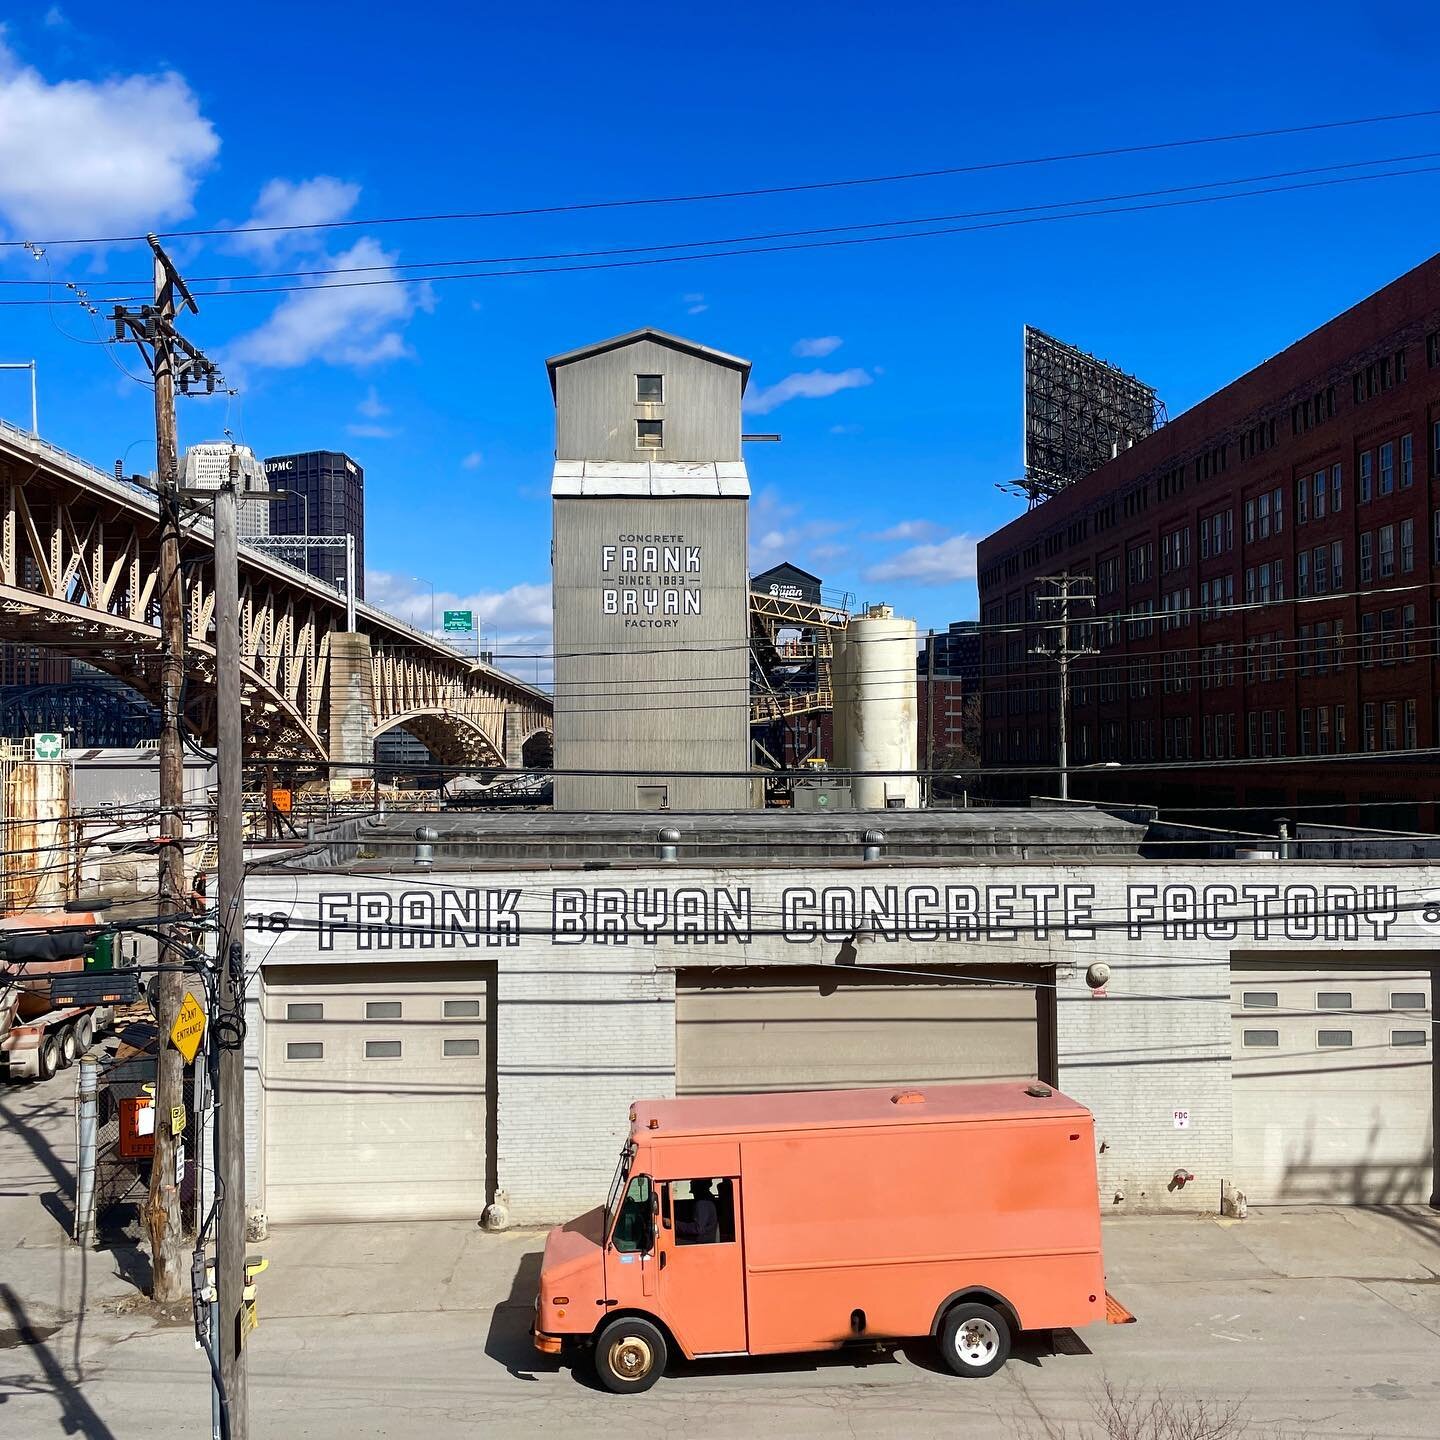 Materials are everything. 140 years in the making and still family operated, Frank Bryan, Inc. helped build Pittsburgh. Their concrete plant - designed in 1924 along the Monongahela &amp; expanded in the 1960s - crafted the city subway, laid the foun